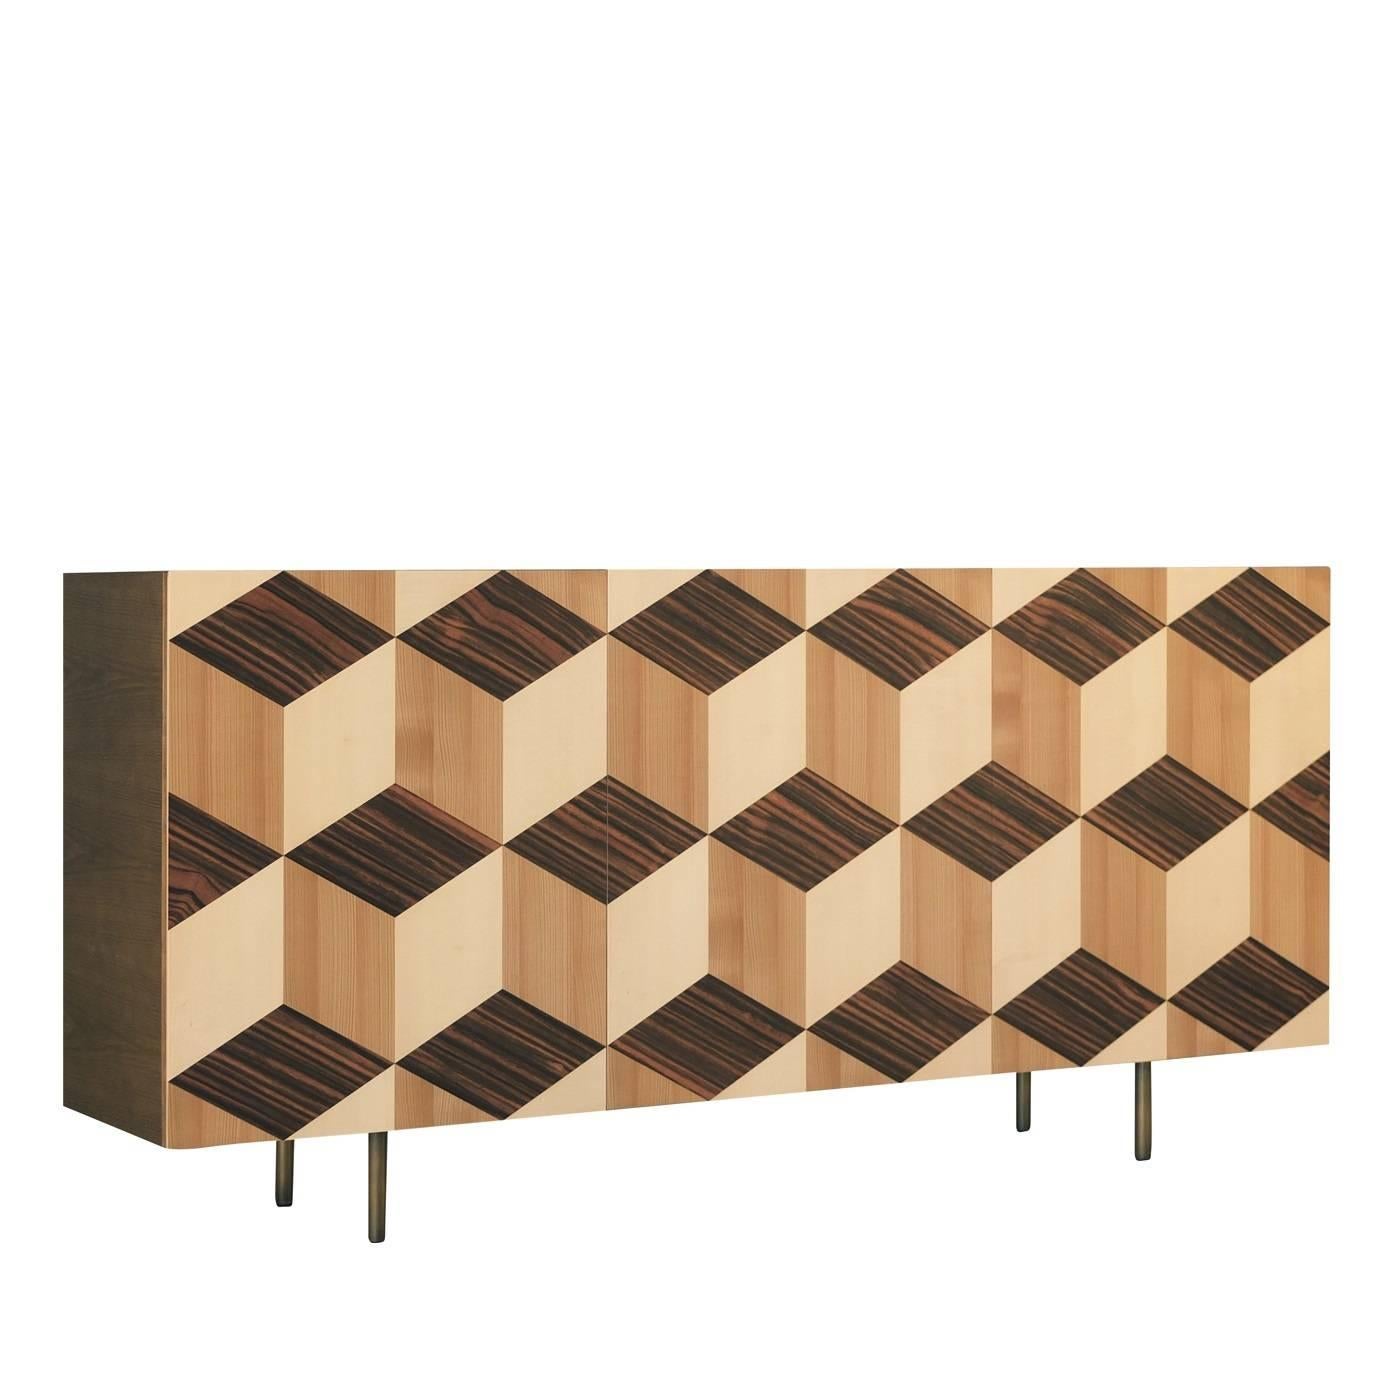 Designed by the MAAM, (the museum of art and furnishing with which Morelato collaborates, promoting an international competition for young designers and each year developing prototypes of great interest), this sideboard is made of different wood